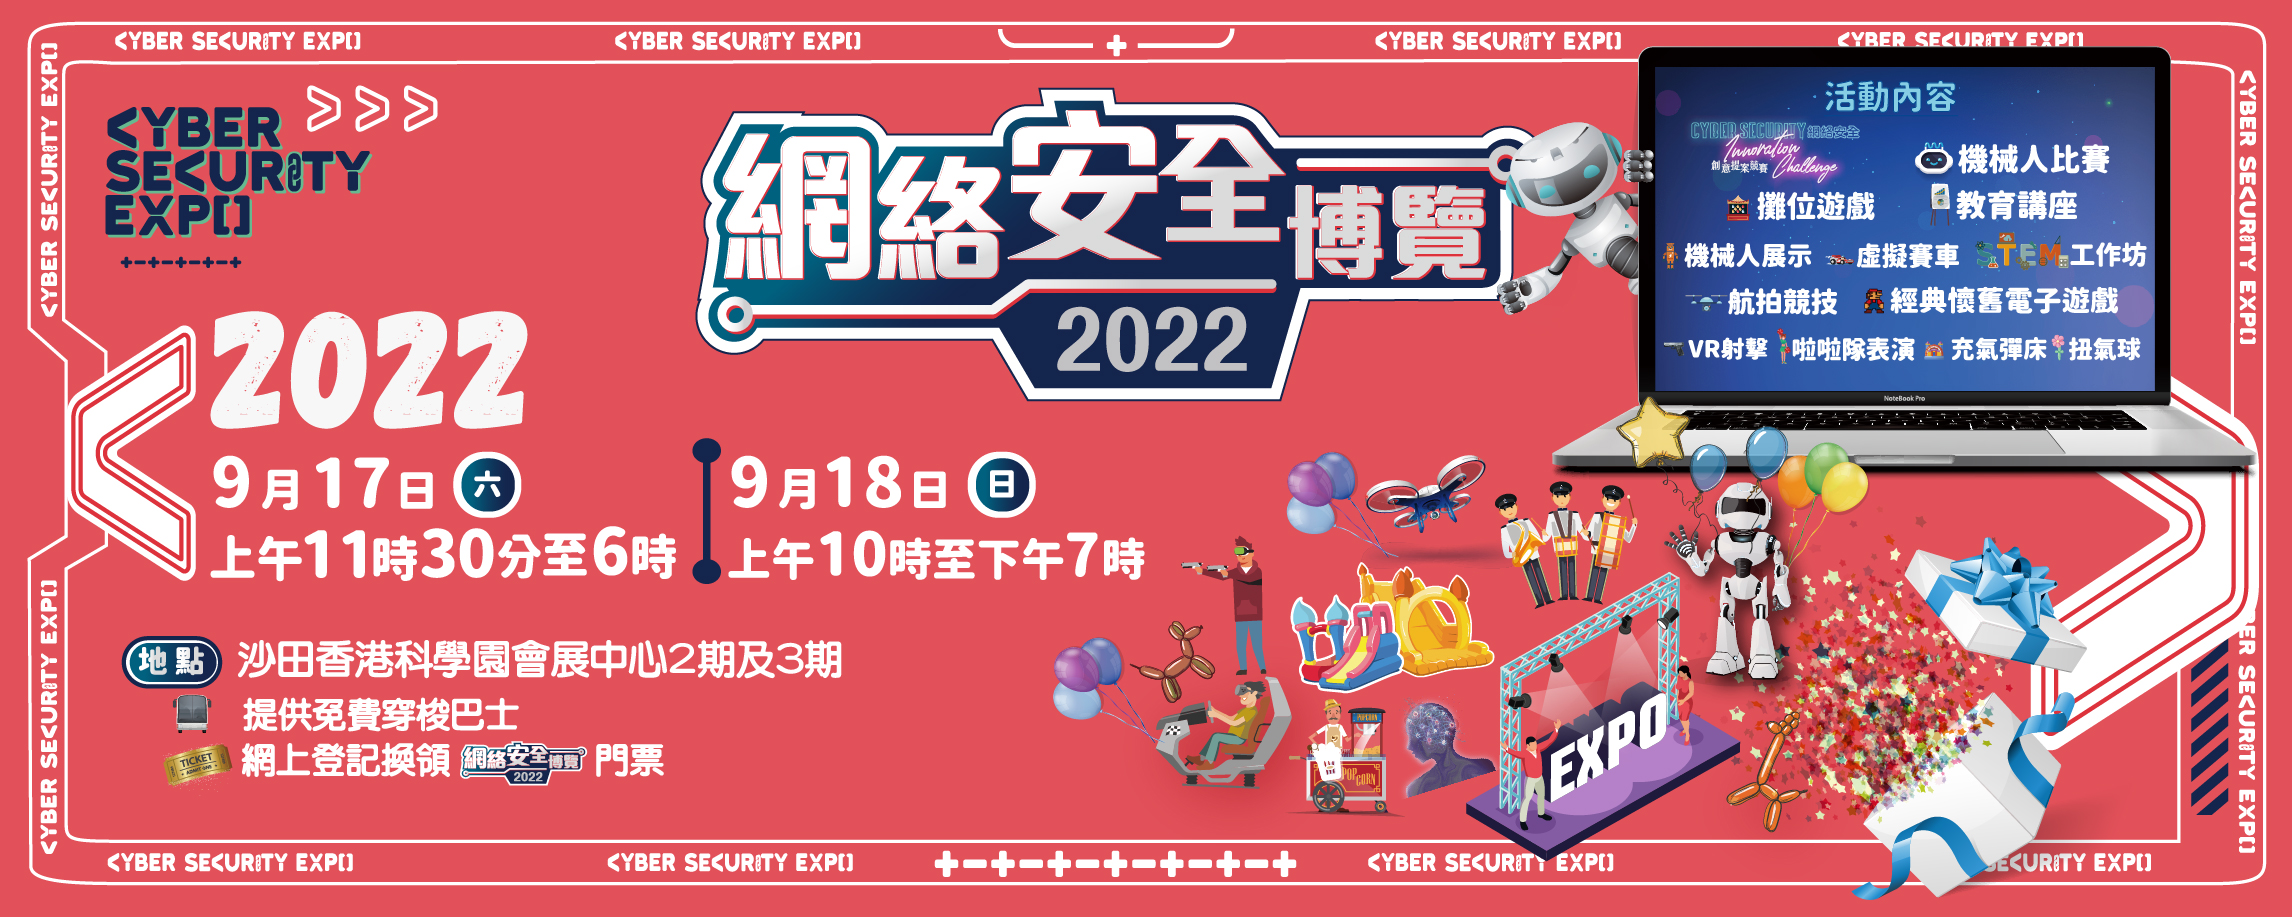 Cyber Security Expo 2022 